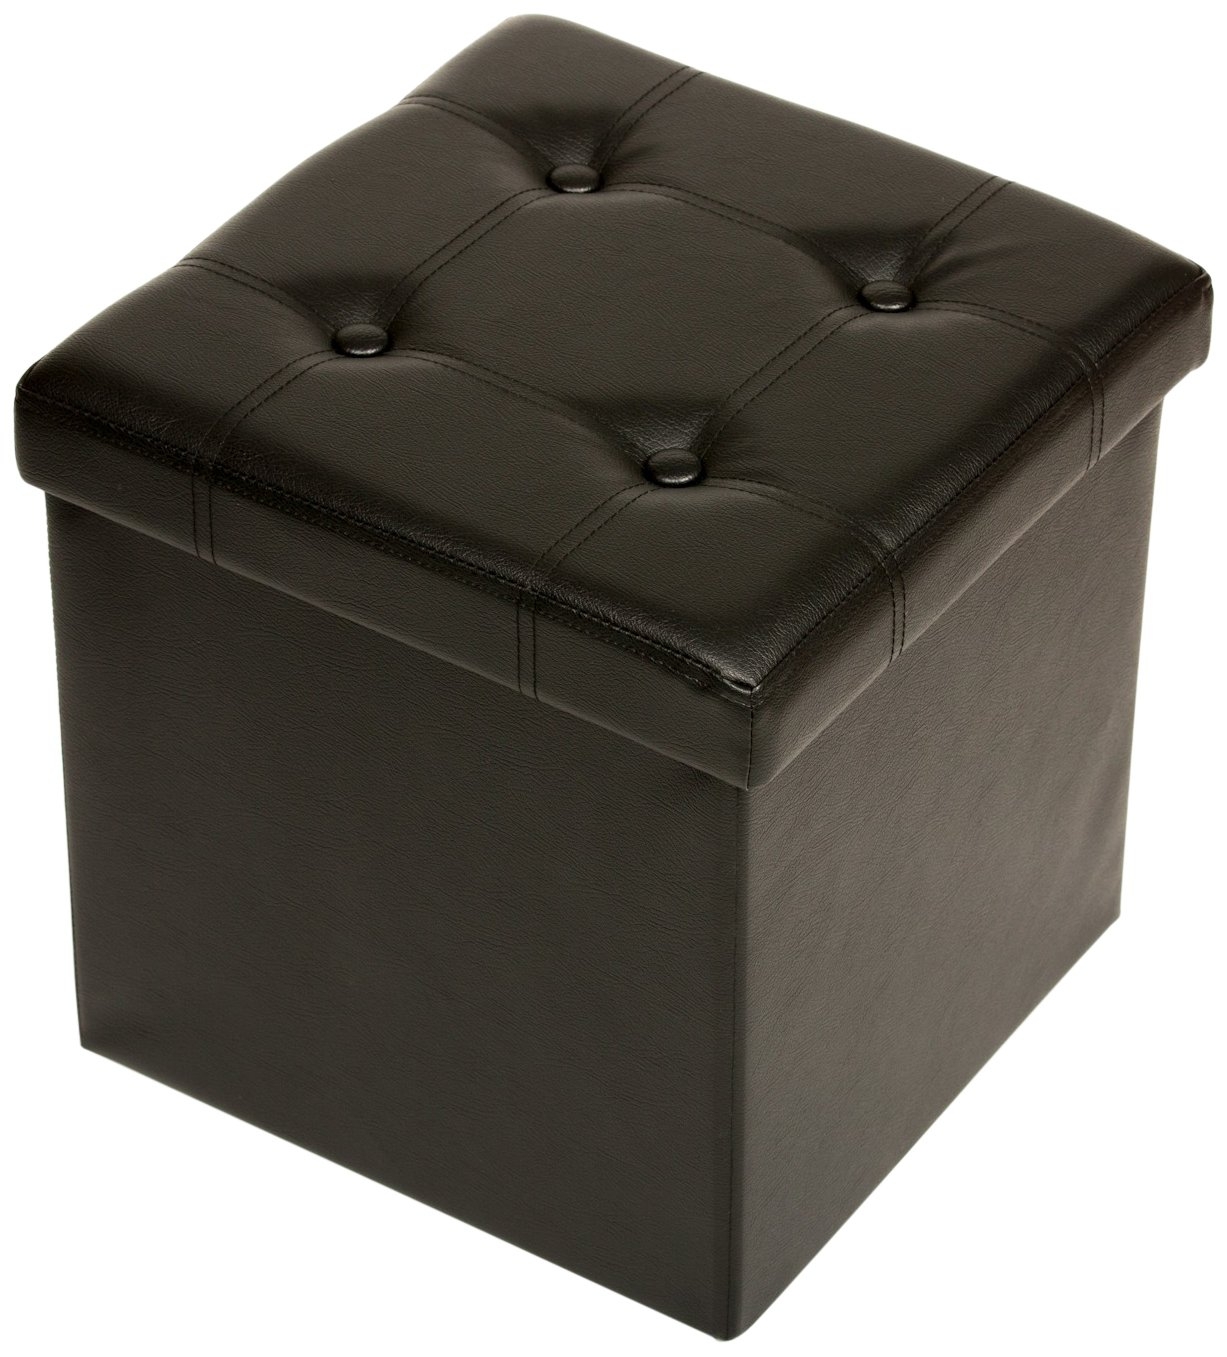 The FHE Group Tufted Folding Storage Ottoman, 15 by 15 by 15-Inch, Brown Faux Leather